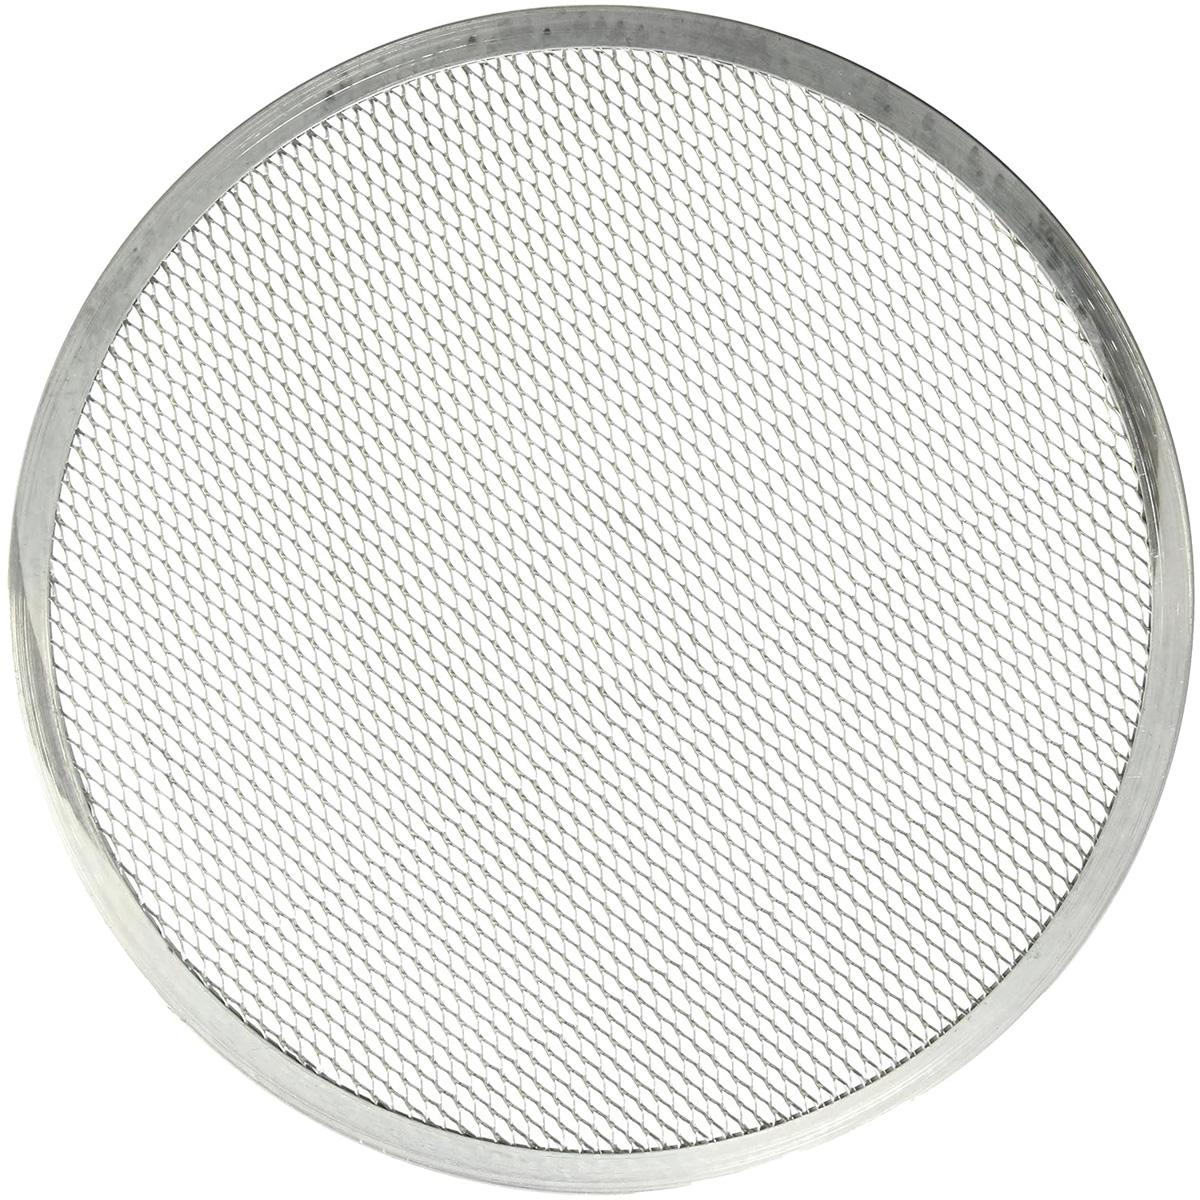 American Metalcraft Aluminum Pizza Screens for $2.20 Shipped